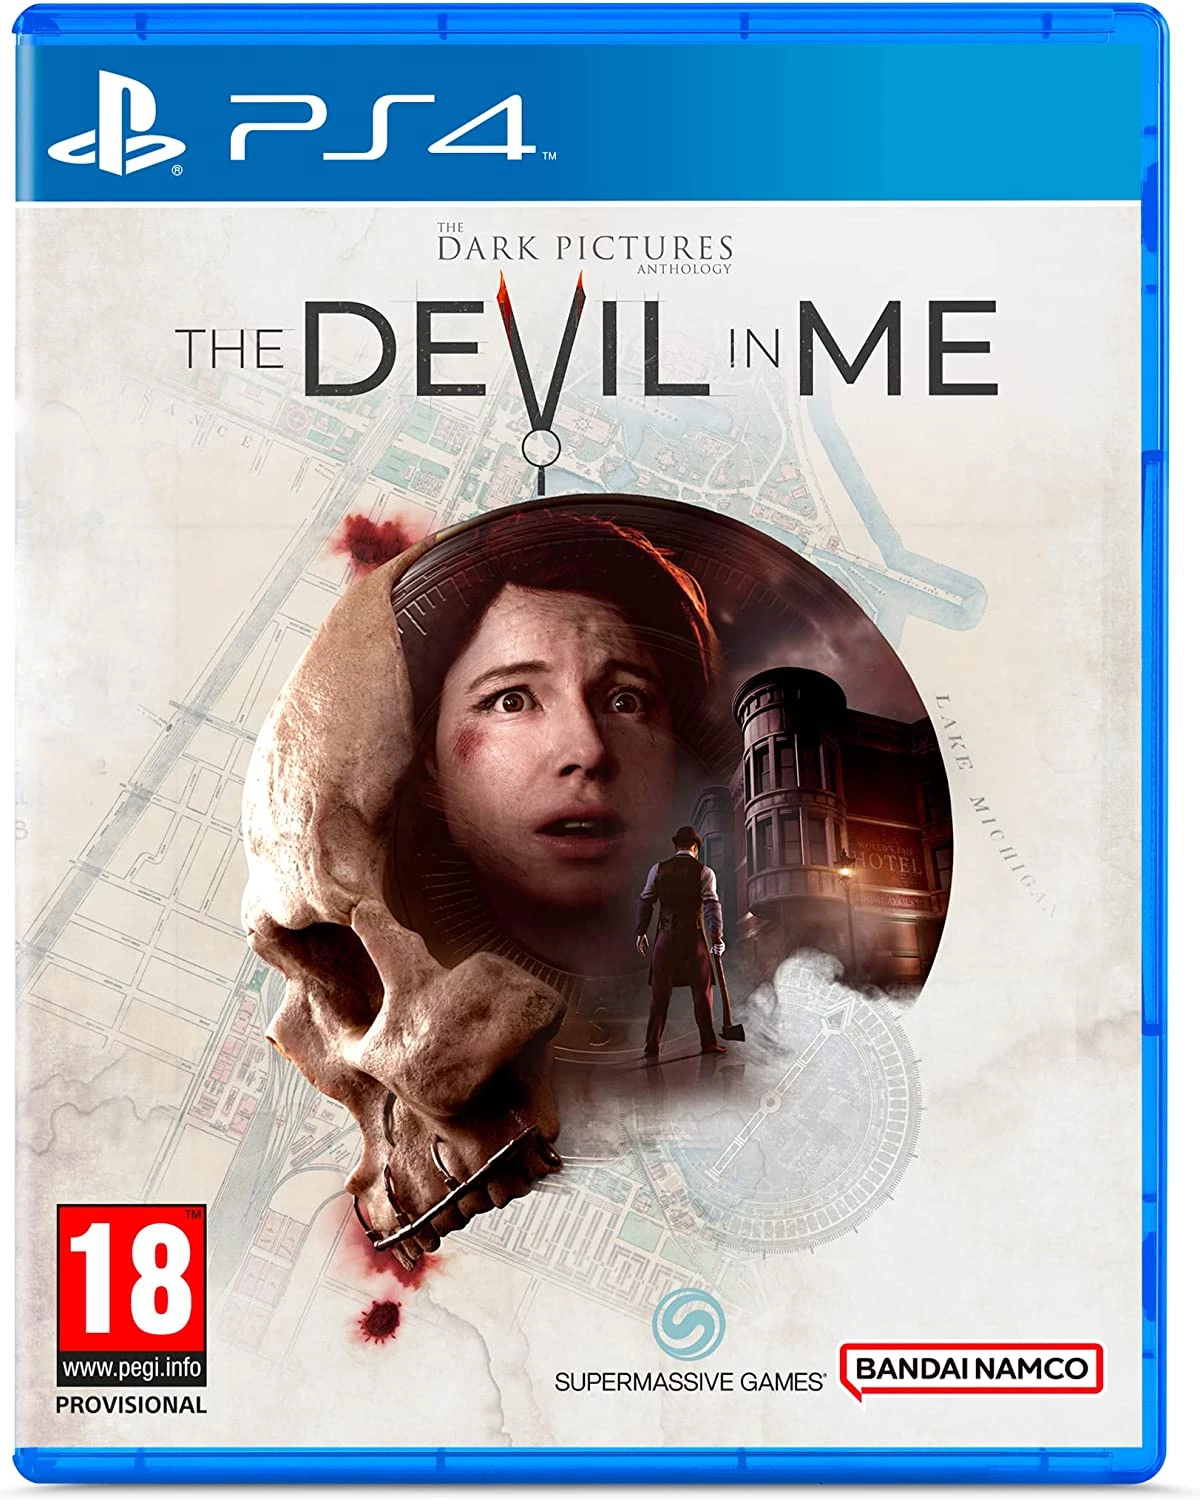 The Dark Pictures Anthology: The Devil in Me (PS4), Supermassive Games